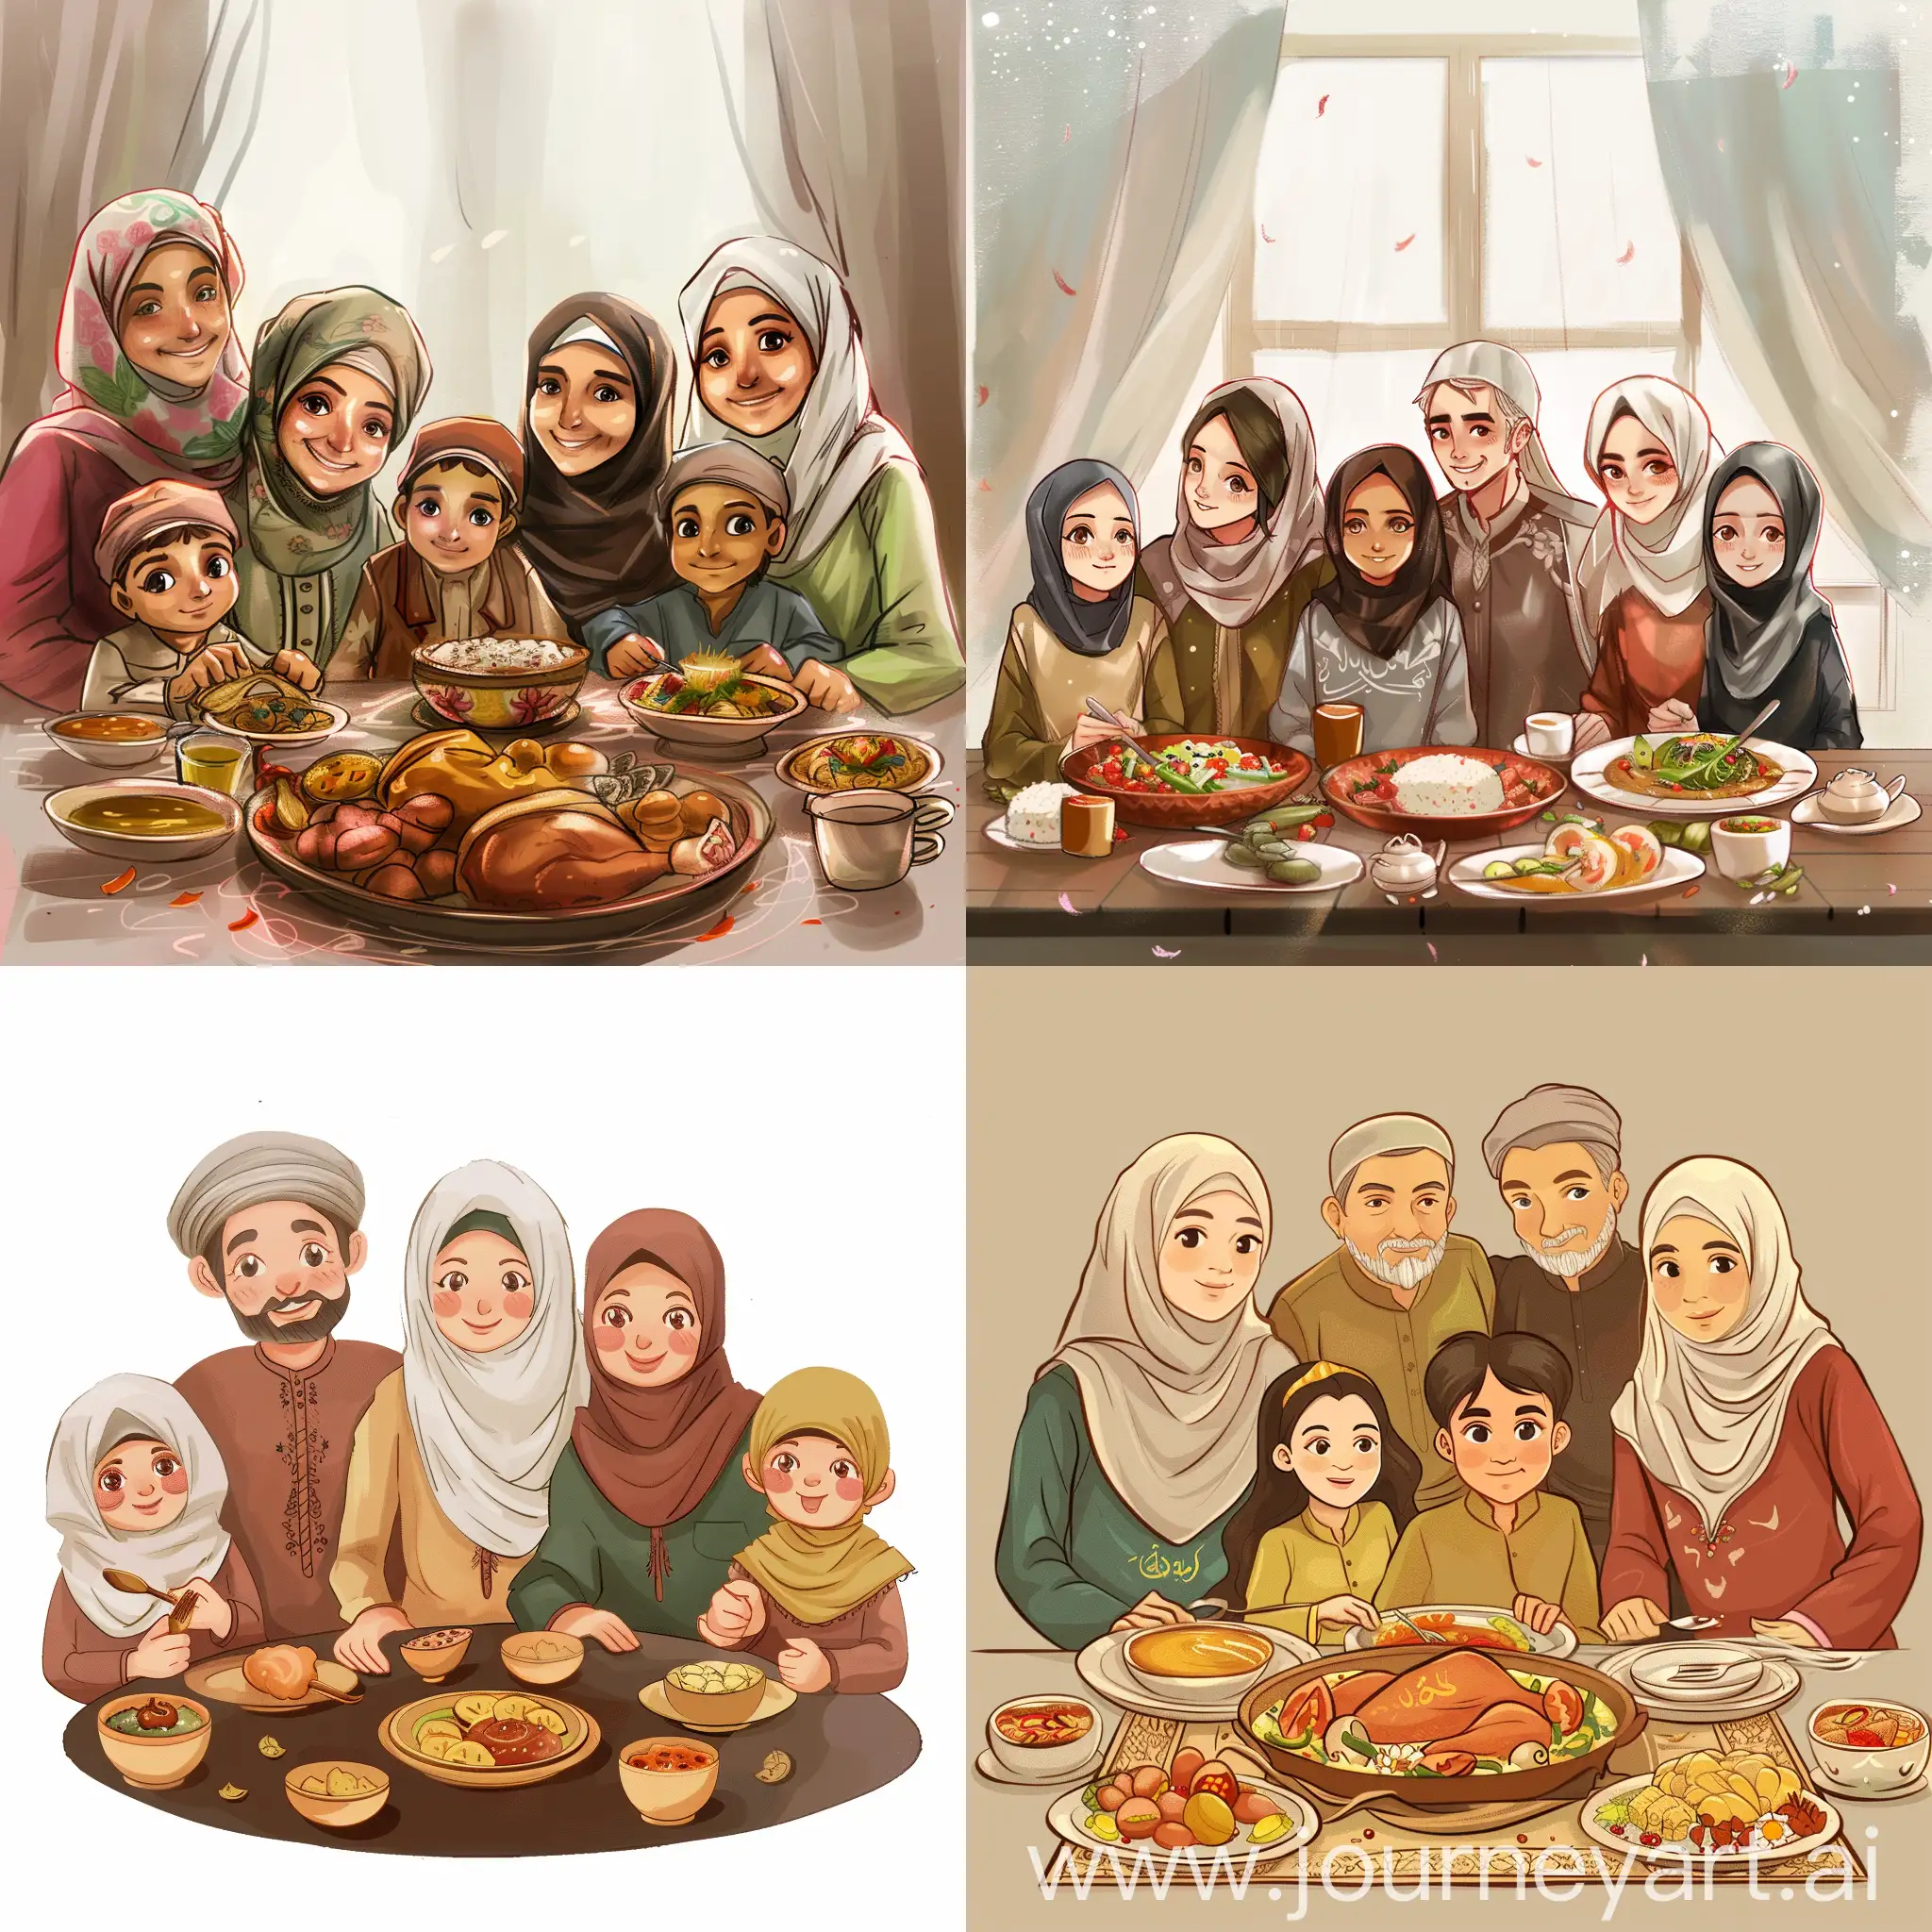 Draw an image of a Muslim family in which husband and wife are 50 years old with their three children age 27, 25, 24. Three children include two girls and one boy who is a middle child. The family is celebrating Ramadan and meal is in front of them.